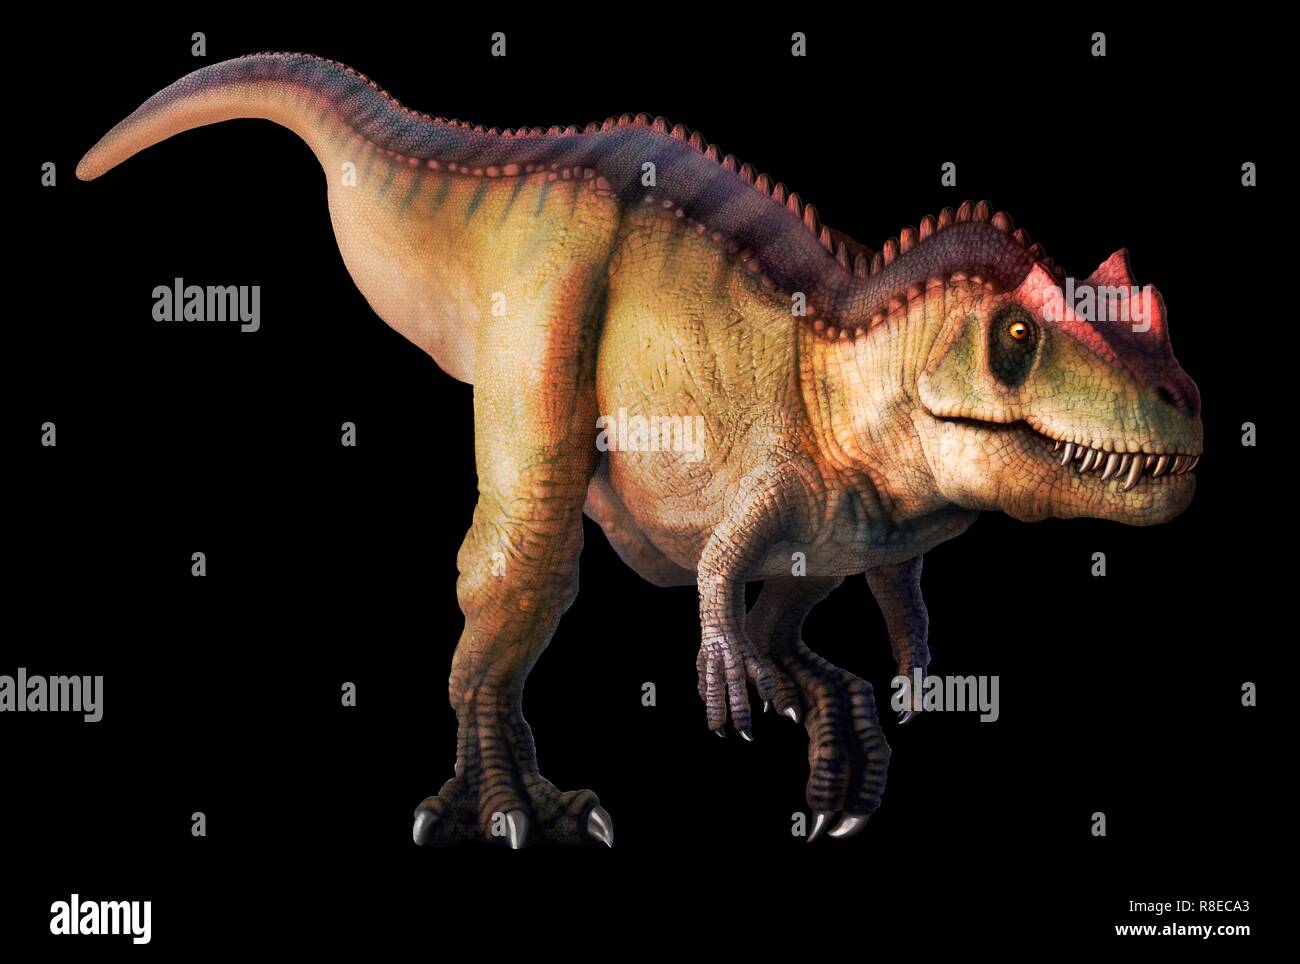 Ceratosaurus, illustration. This large carnivorous theropod dinosaur lived during the Late Jurassic (153-148 million years ago) in what is now North America. It reached lengths of 6 to 7 metres. Stock Photo